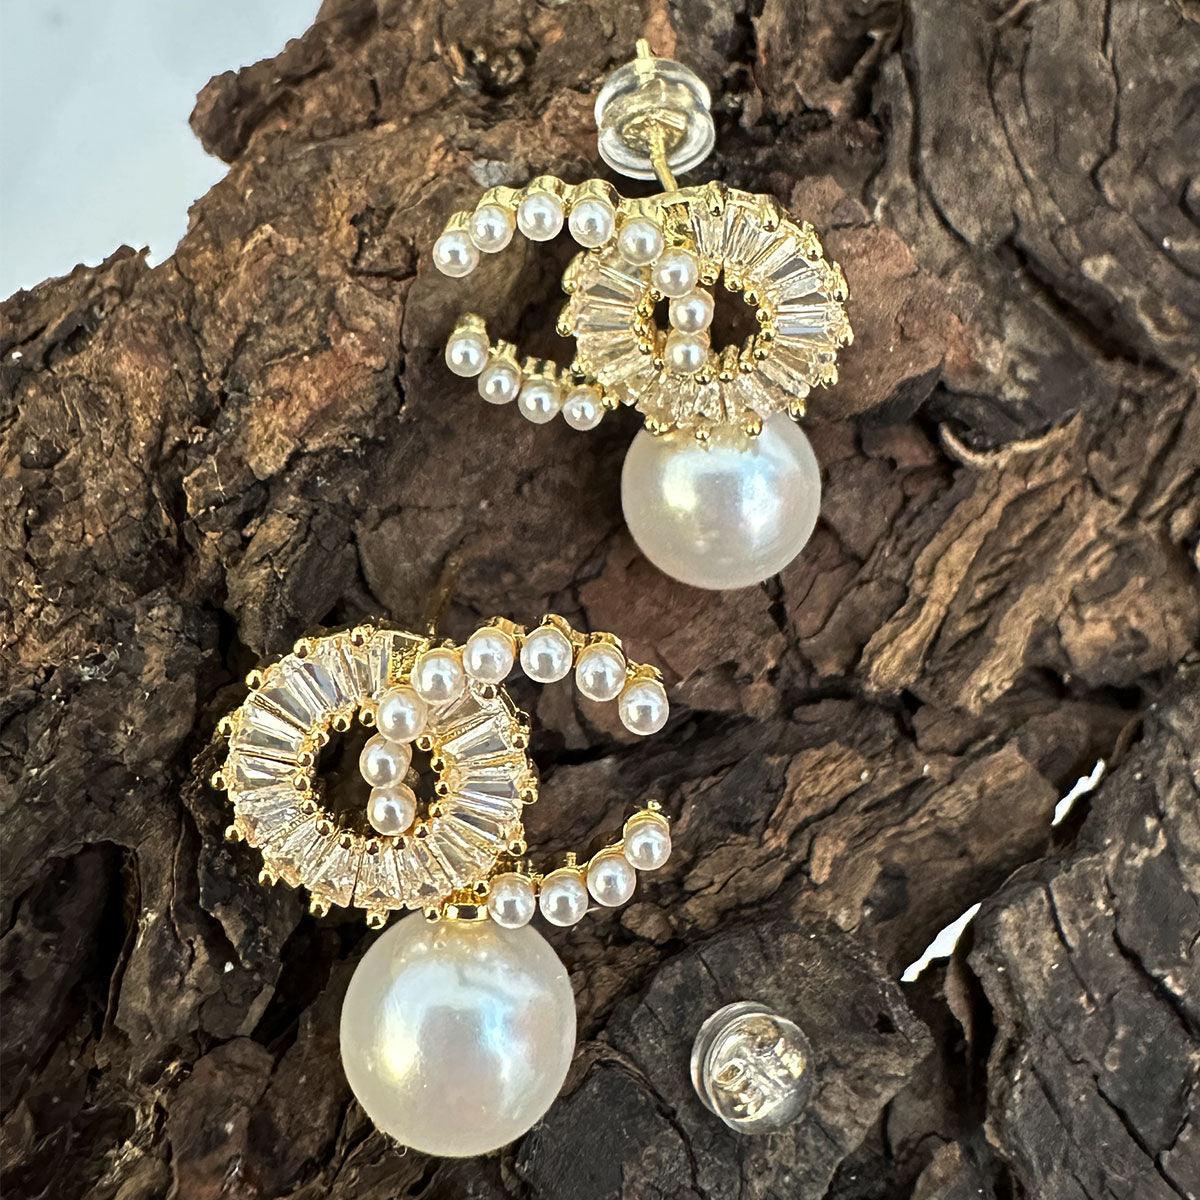 Fashion Jewelry: Gorgeous CZ Drop Pearl Earrings in Gold Finish